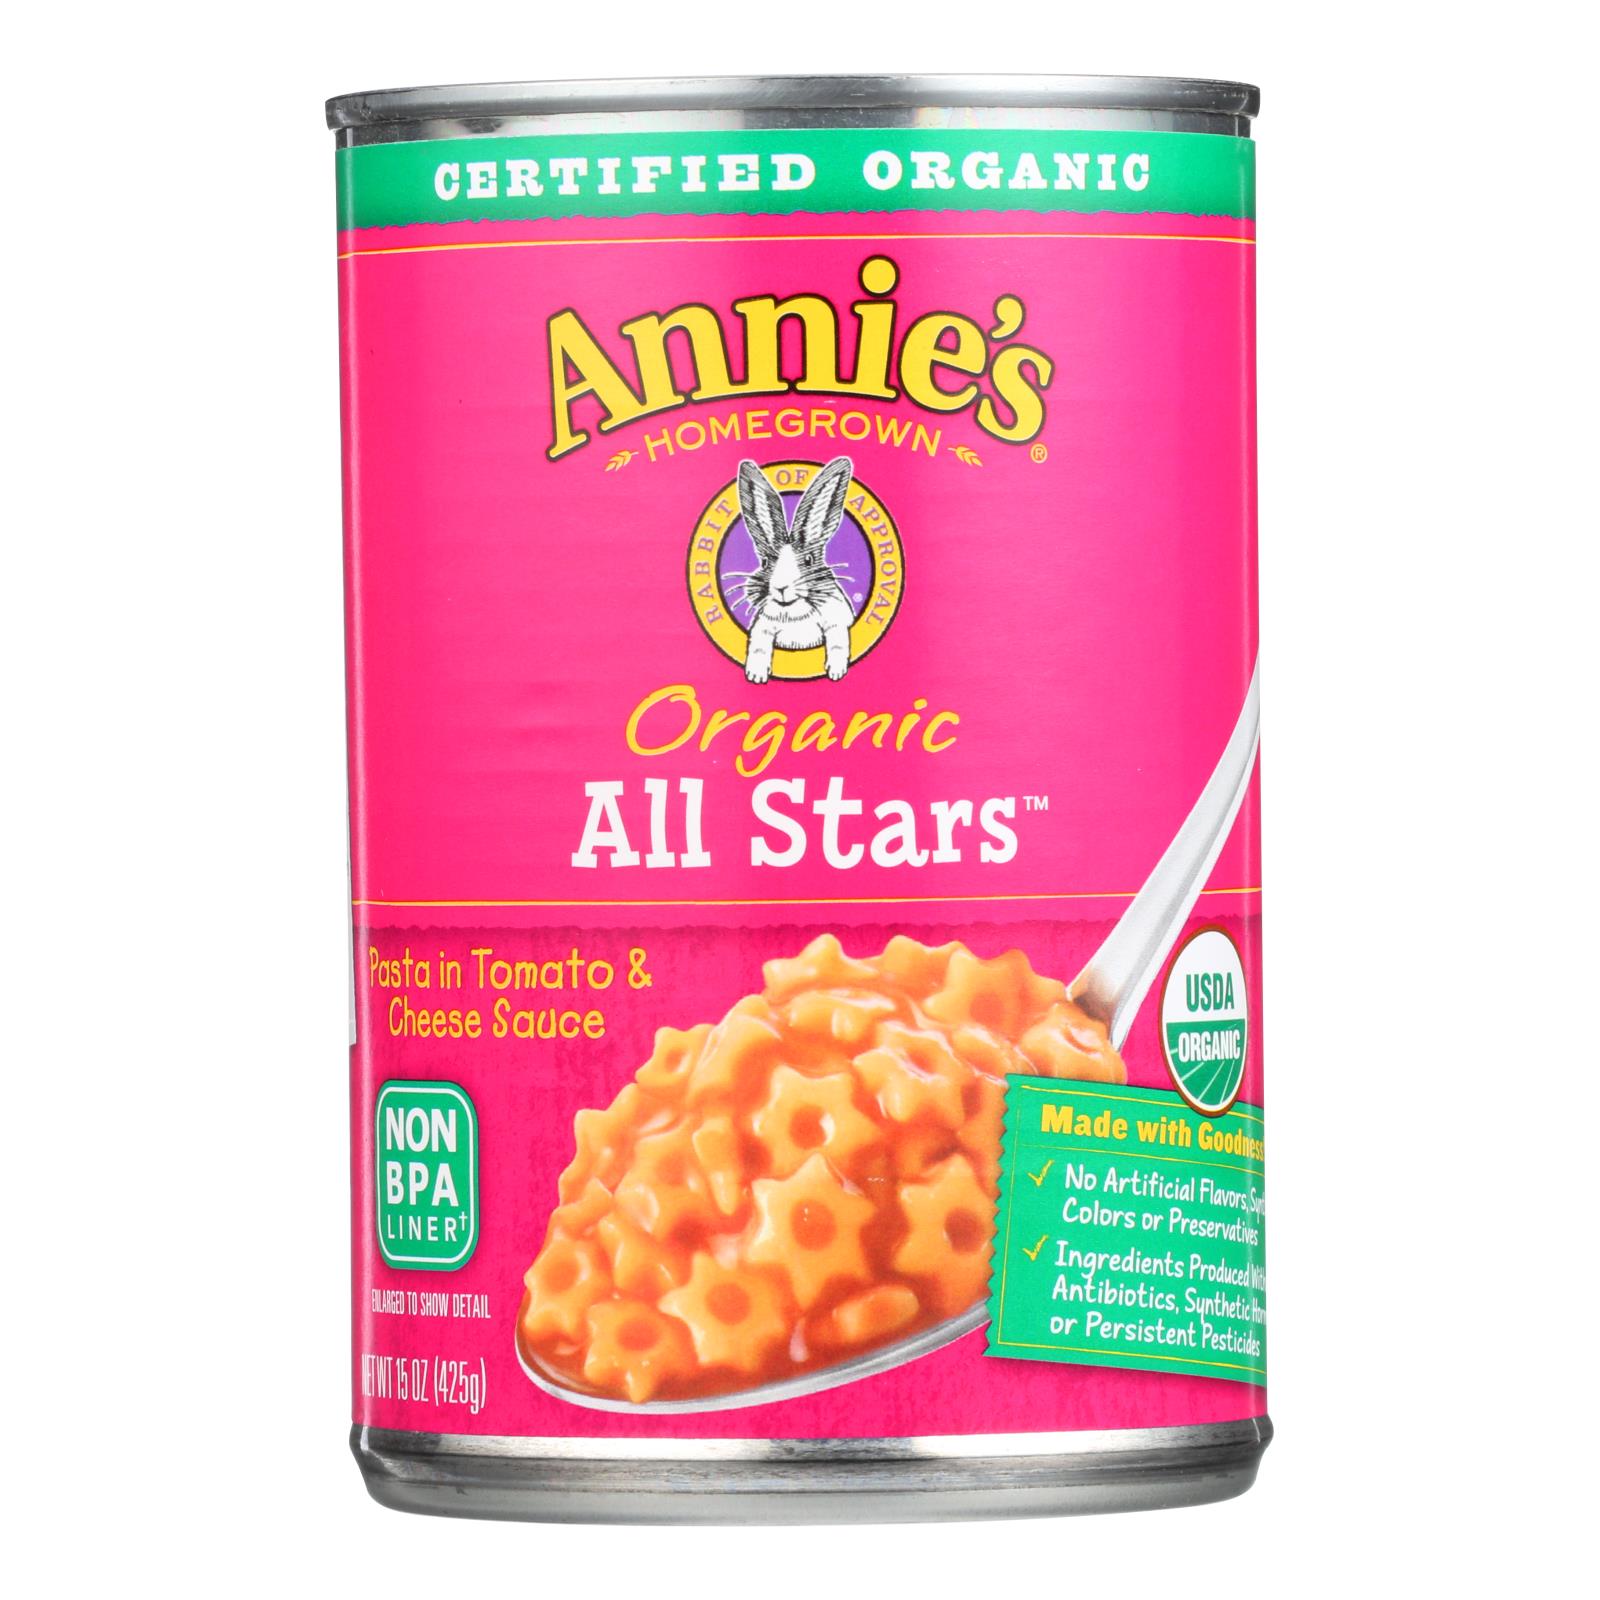 Annie'S Homegrown, Annie's Homegrown Organic All Stars Pasta In Tomato and Cheese Sauce - Case of 12 - 15 oz. (Pack of 12)